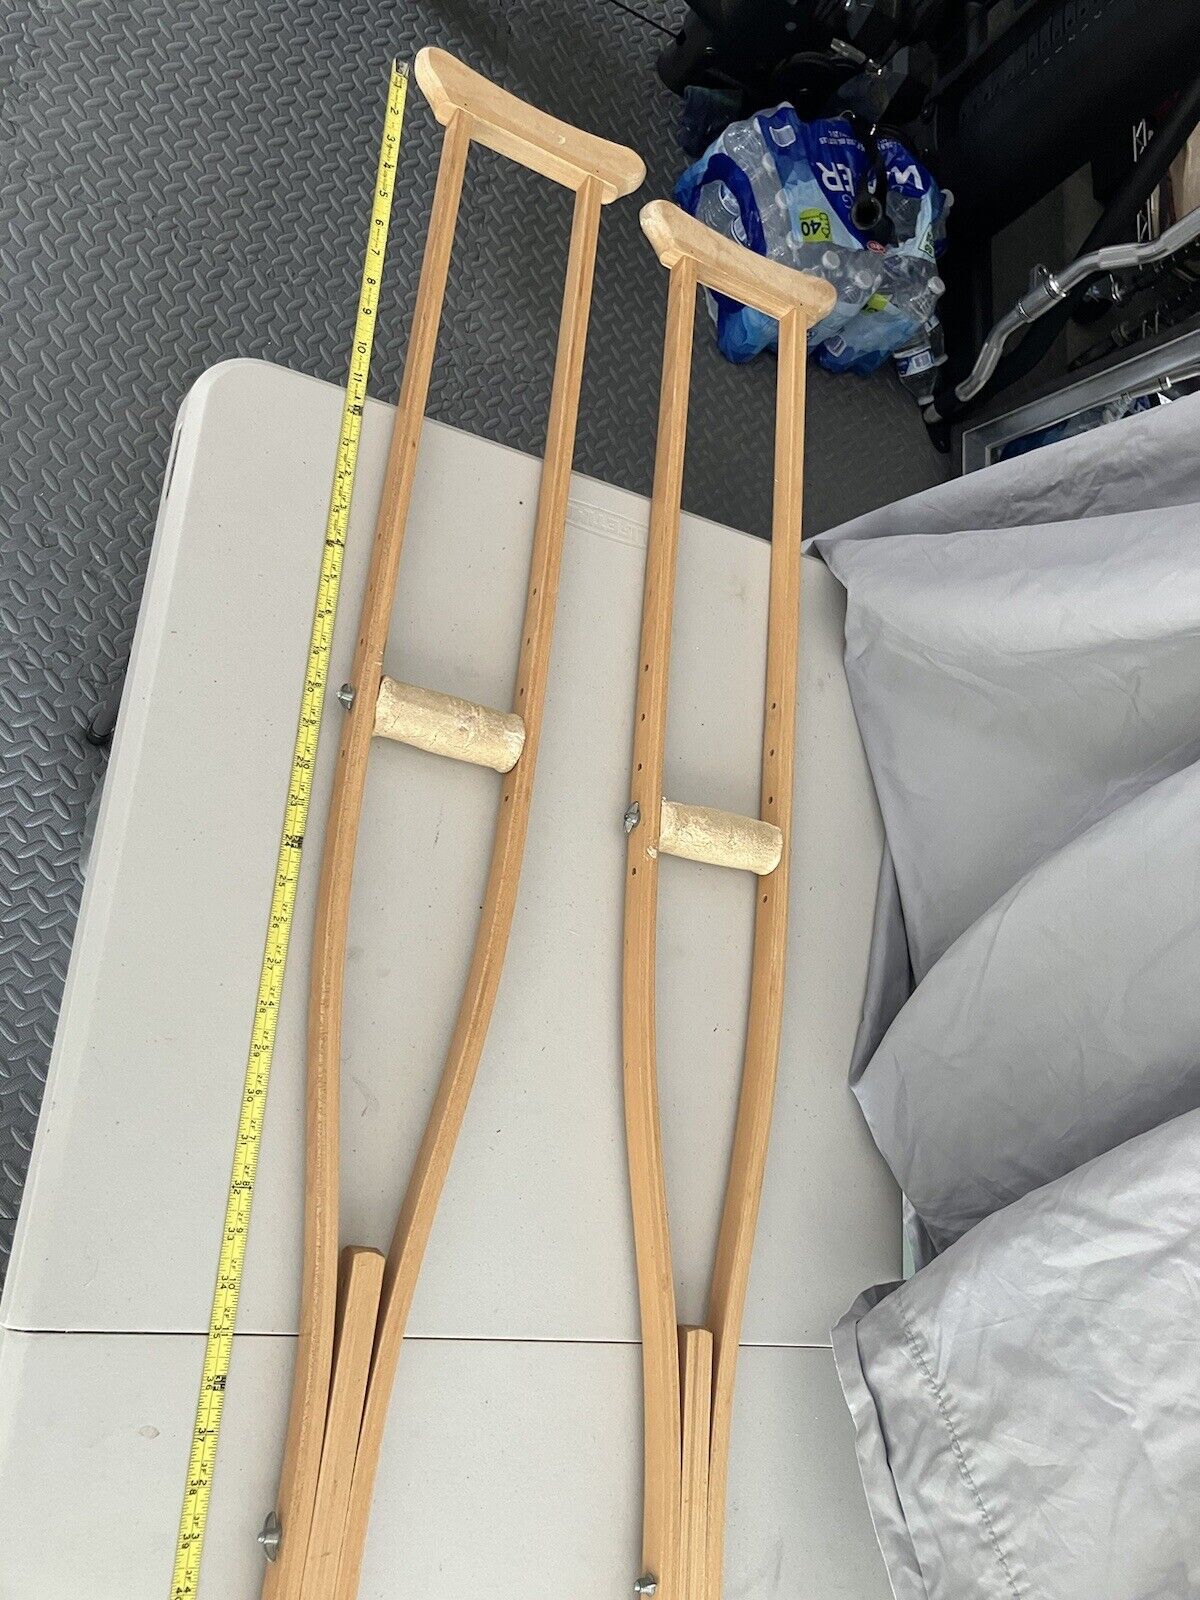 Vintage Wooden Crutches - Up to 350 Pounds